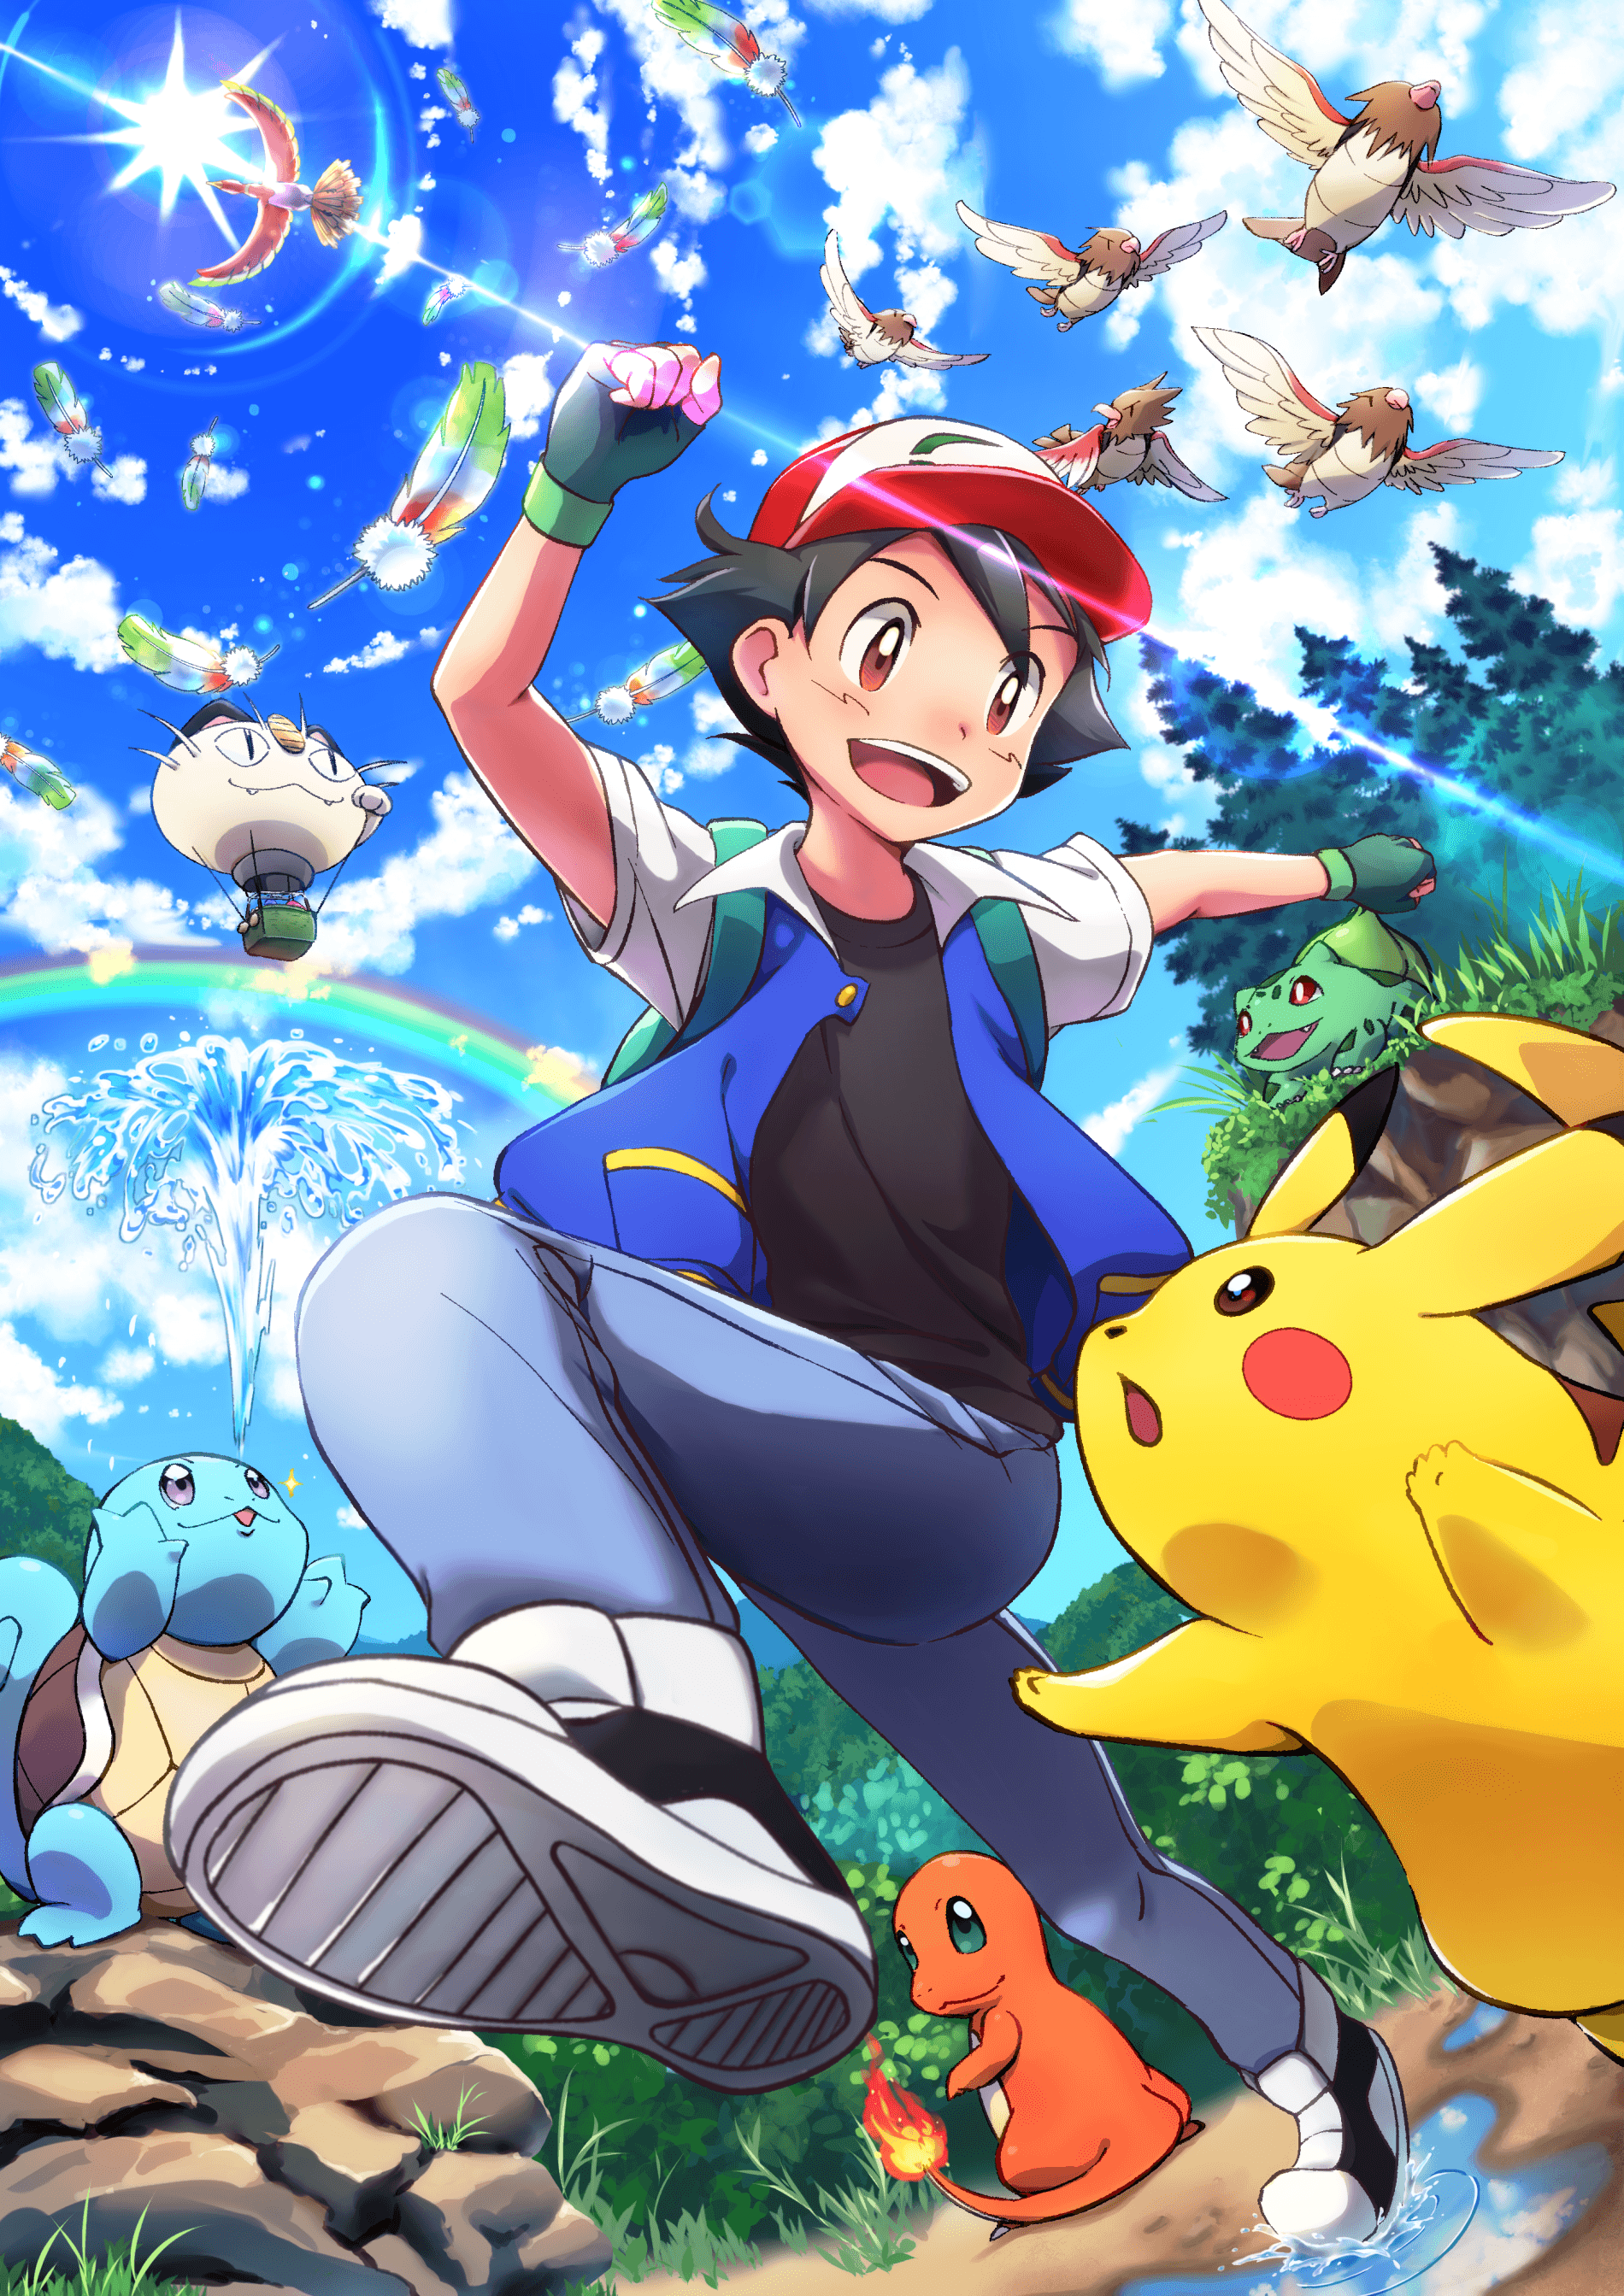 Download Fearless Friends - Ash And Pikachu Wallpaper | Wallpapers.com